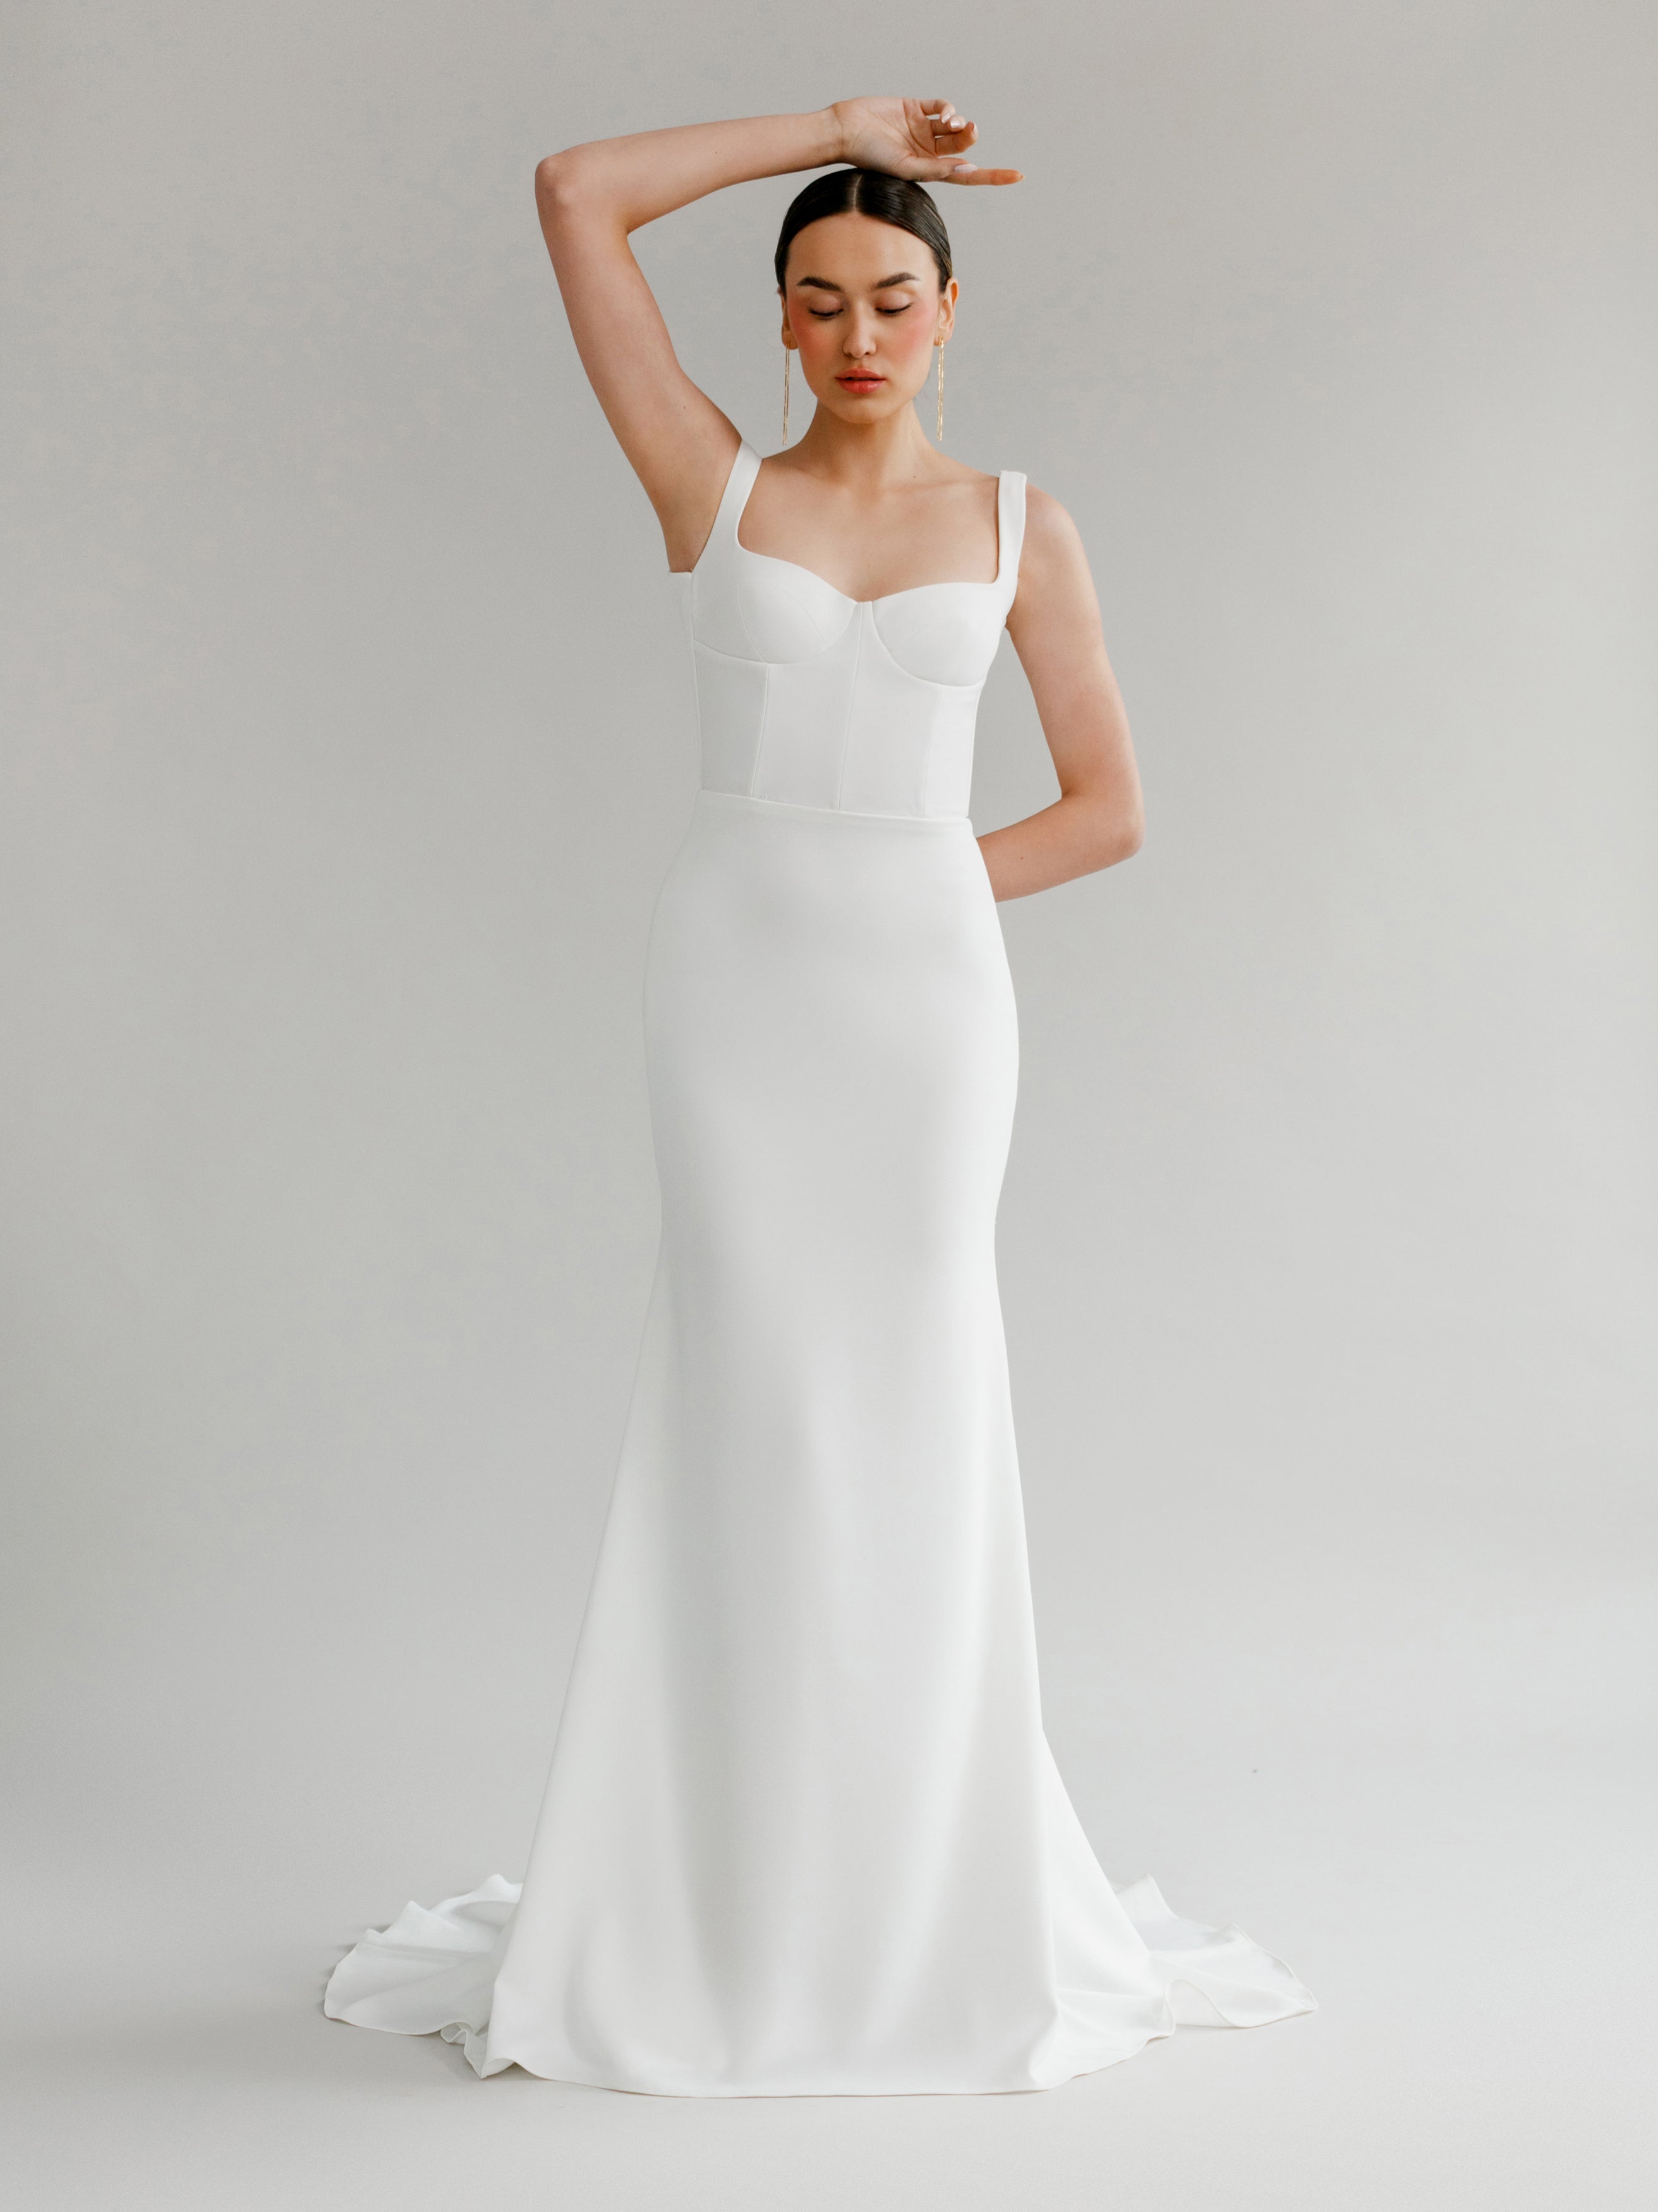 Angelica : A wedding gown with a bustier-style bodice + low back – Aesling